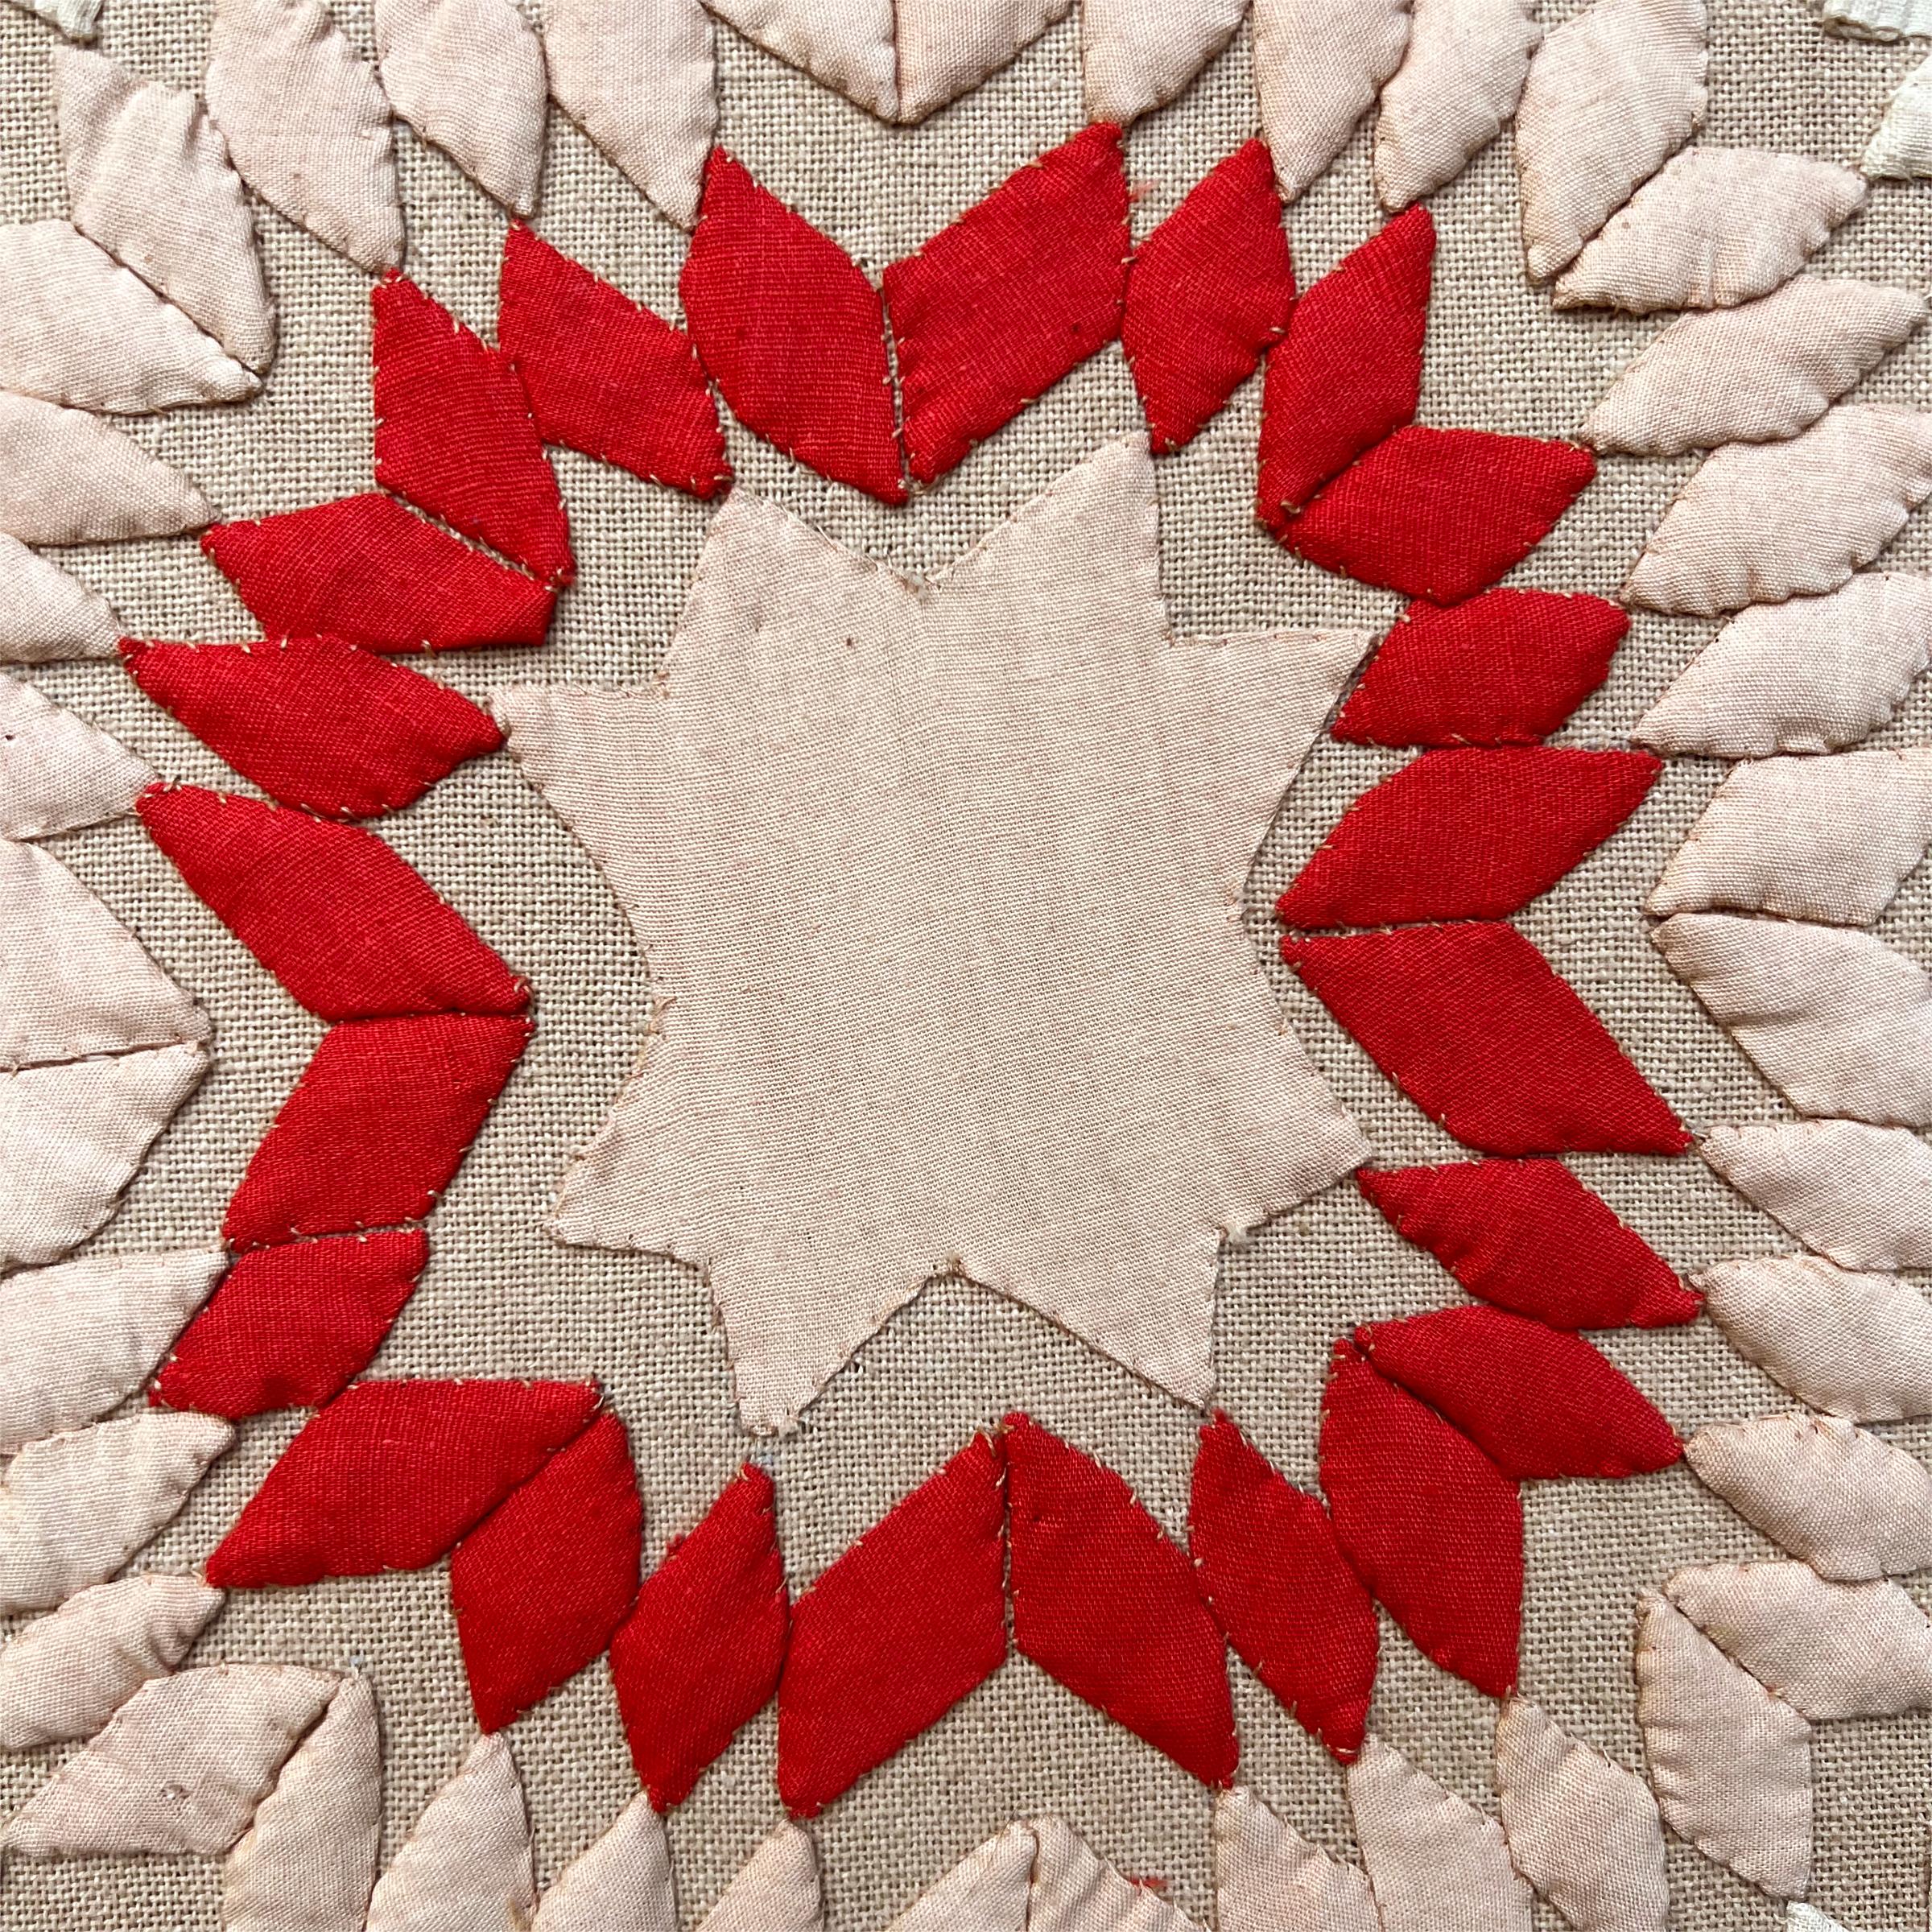 Mounted Late 19th Century American Appliqué Textile For Sale 2